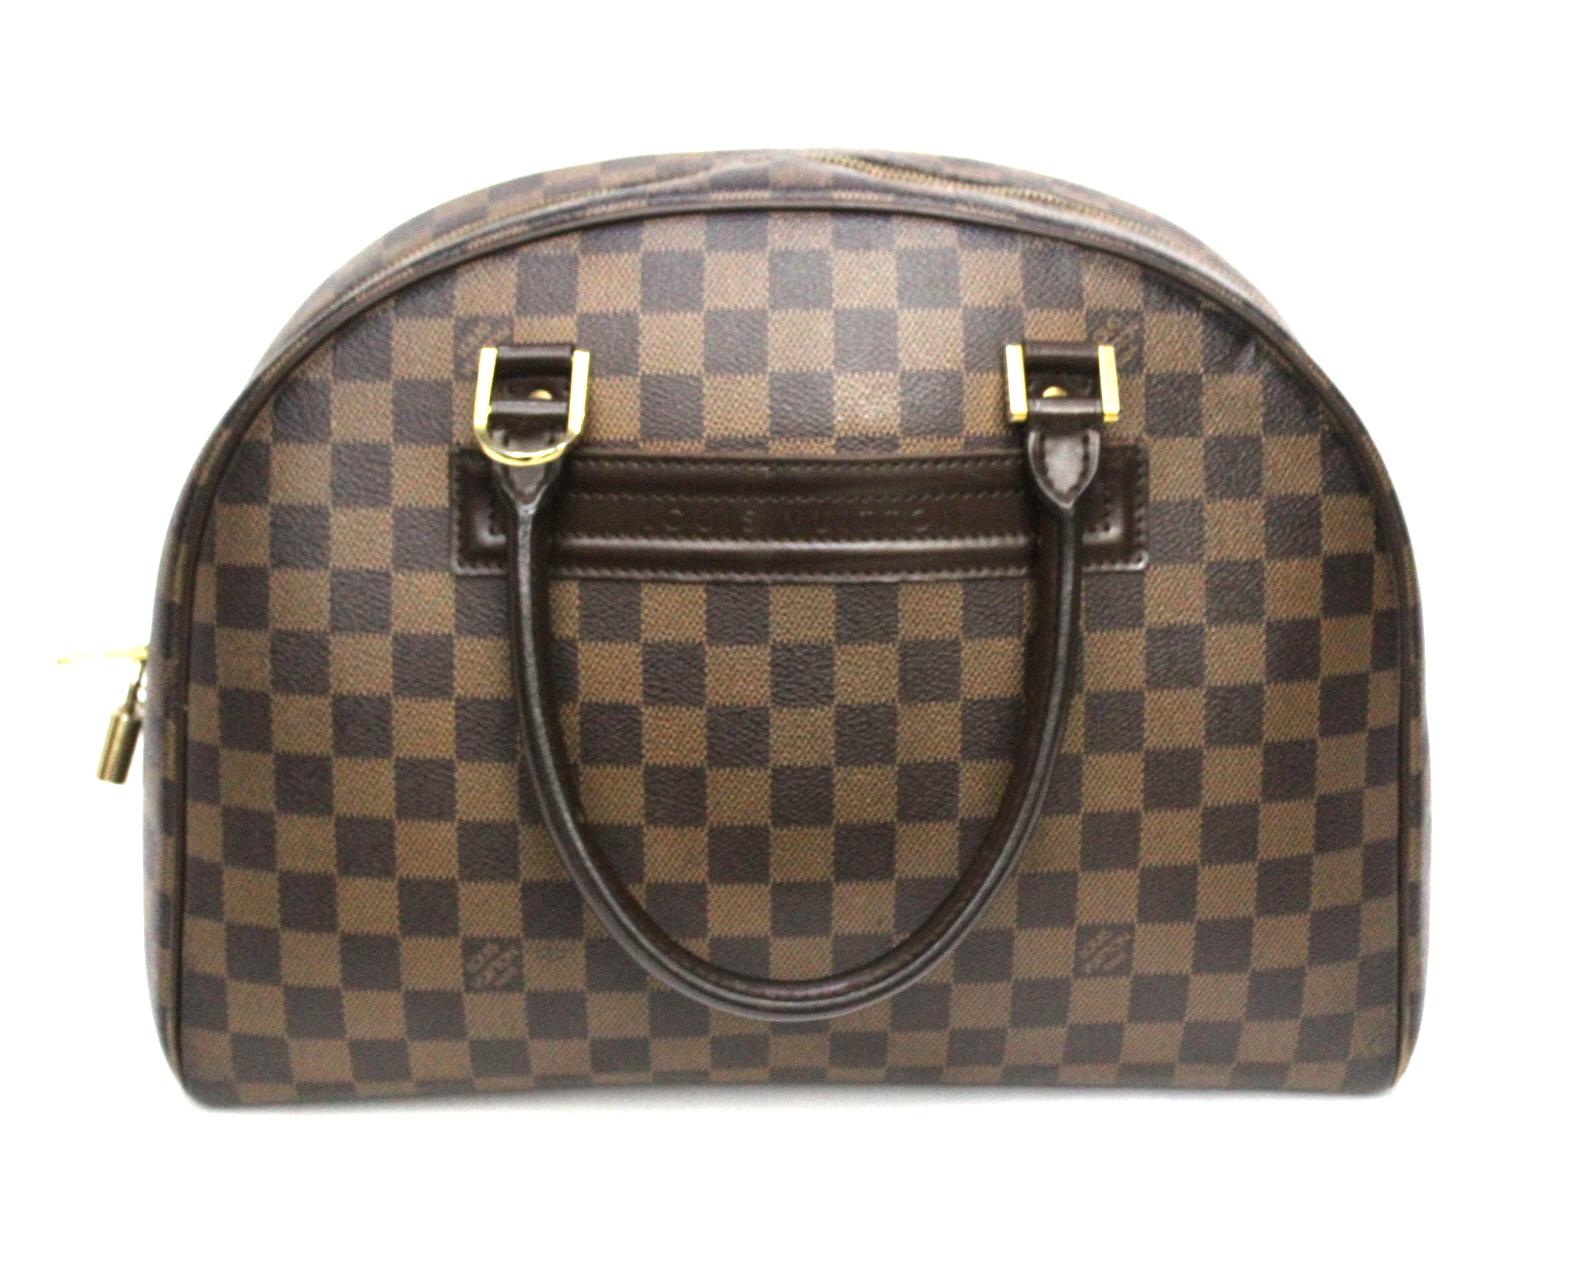 Superb Louis Vuitton model Nolita bag, in damier ebene with gold hardware. This rare bag is now out of production. Zip closure, spacious interiors to record all the daily essentials. The front of the bag is decorated with a Louis Vuitton logo